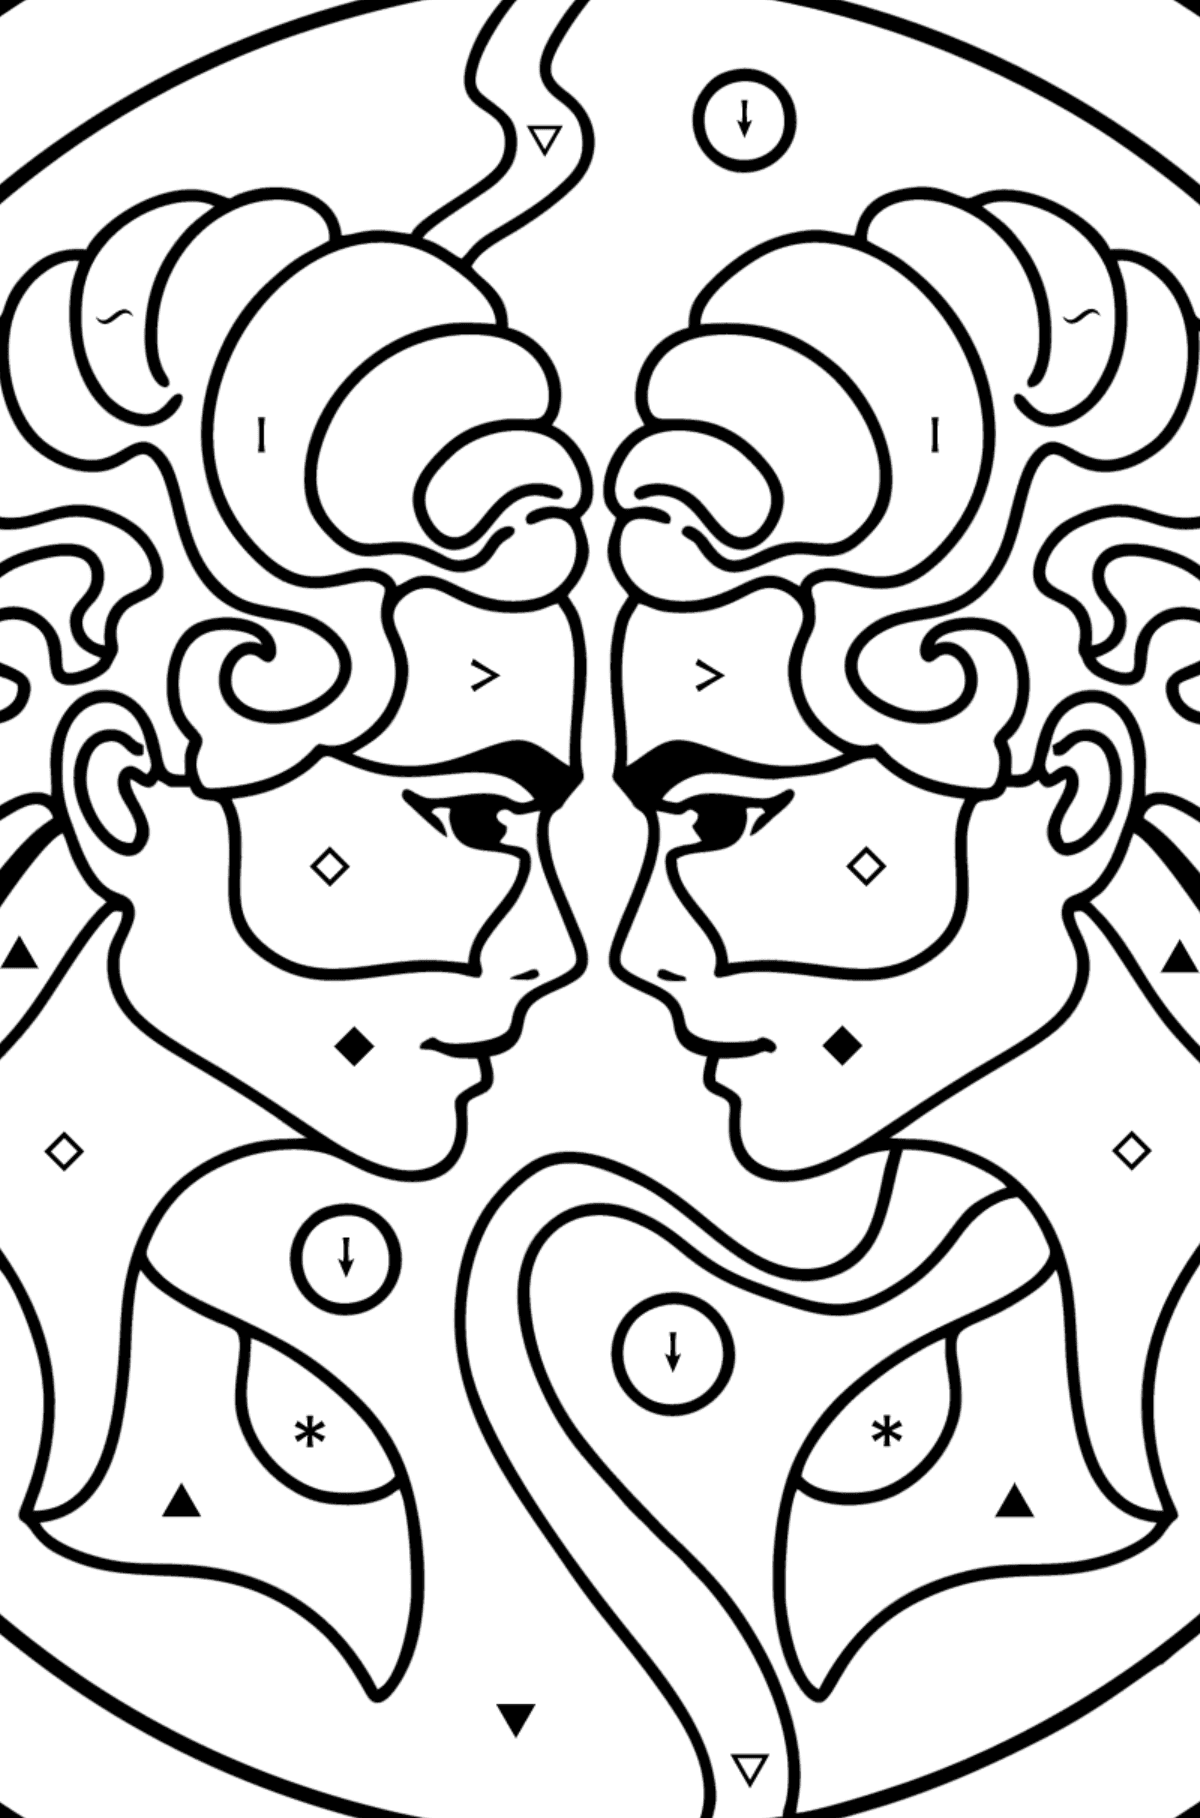 Coloring page for kids - Gemini zodiac sign - Coloring by Symbols for Kids